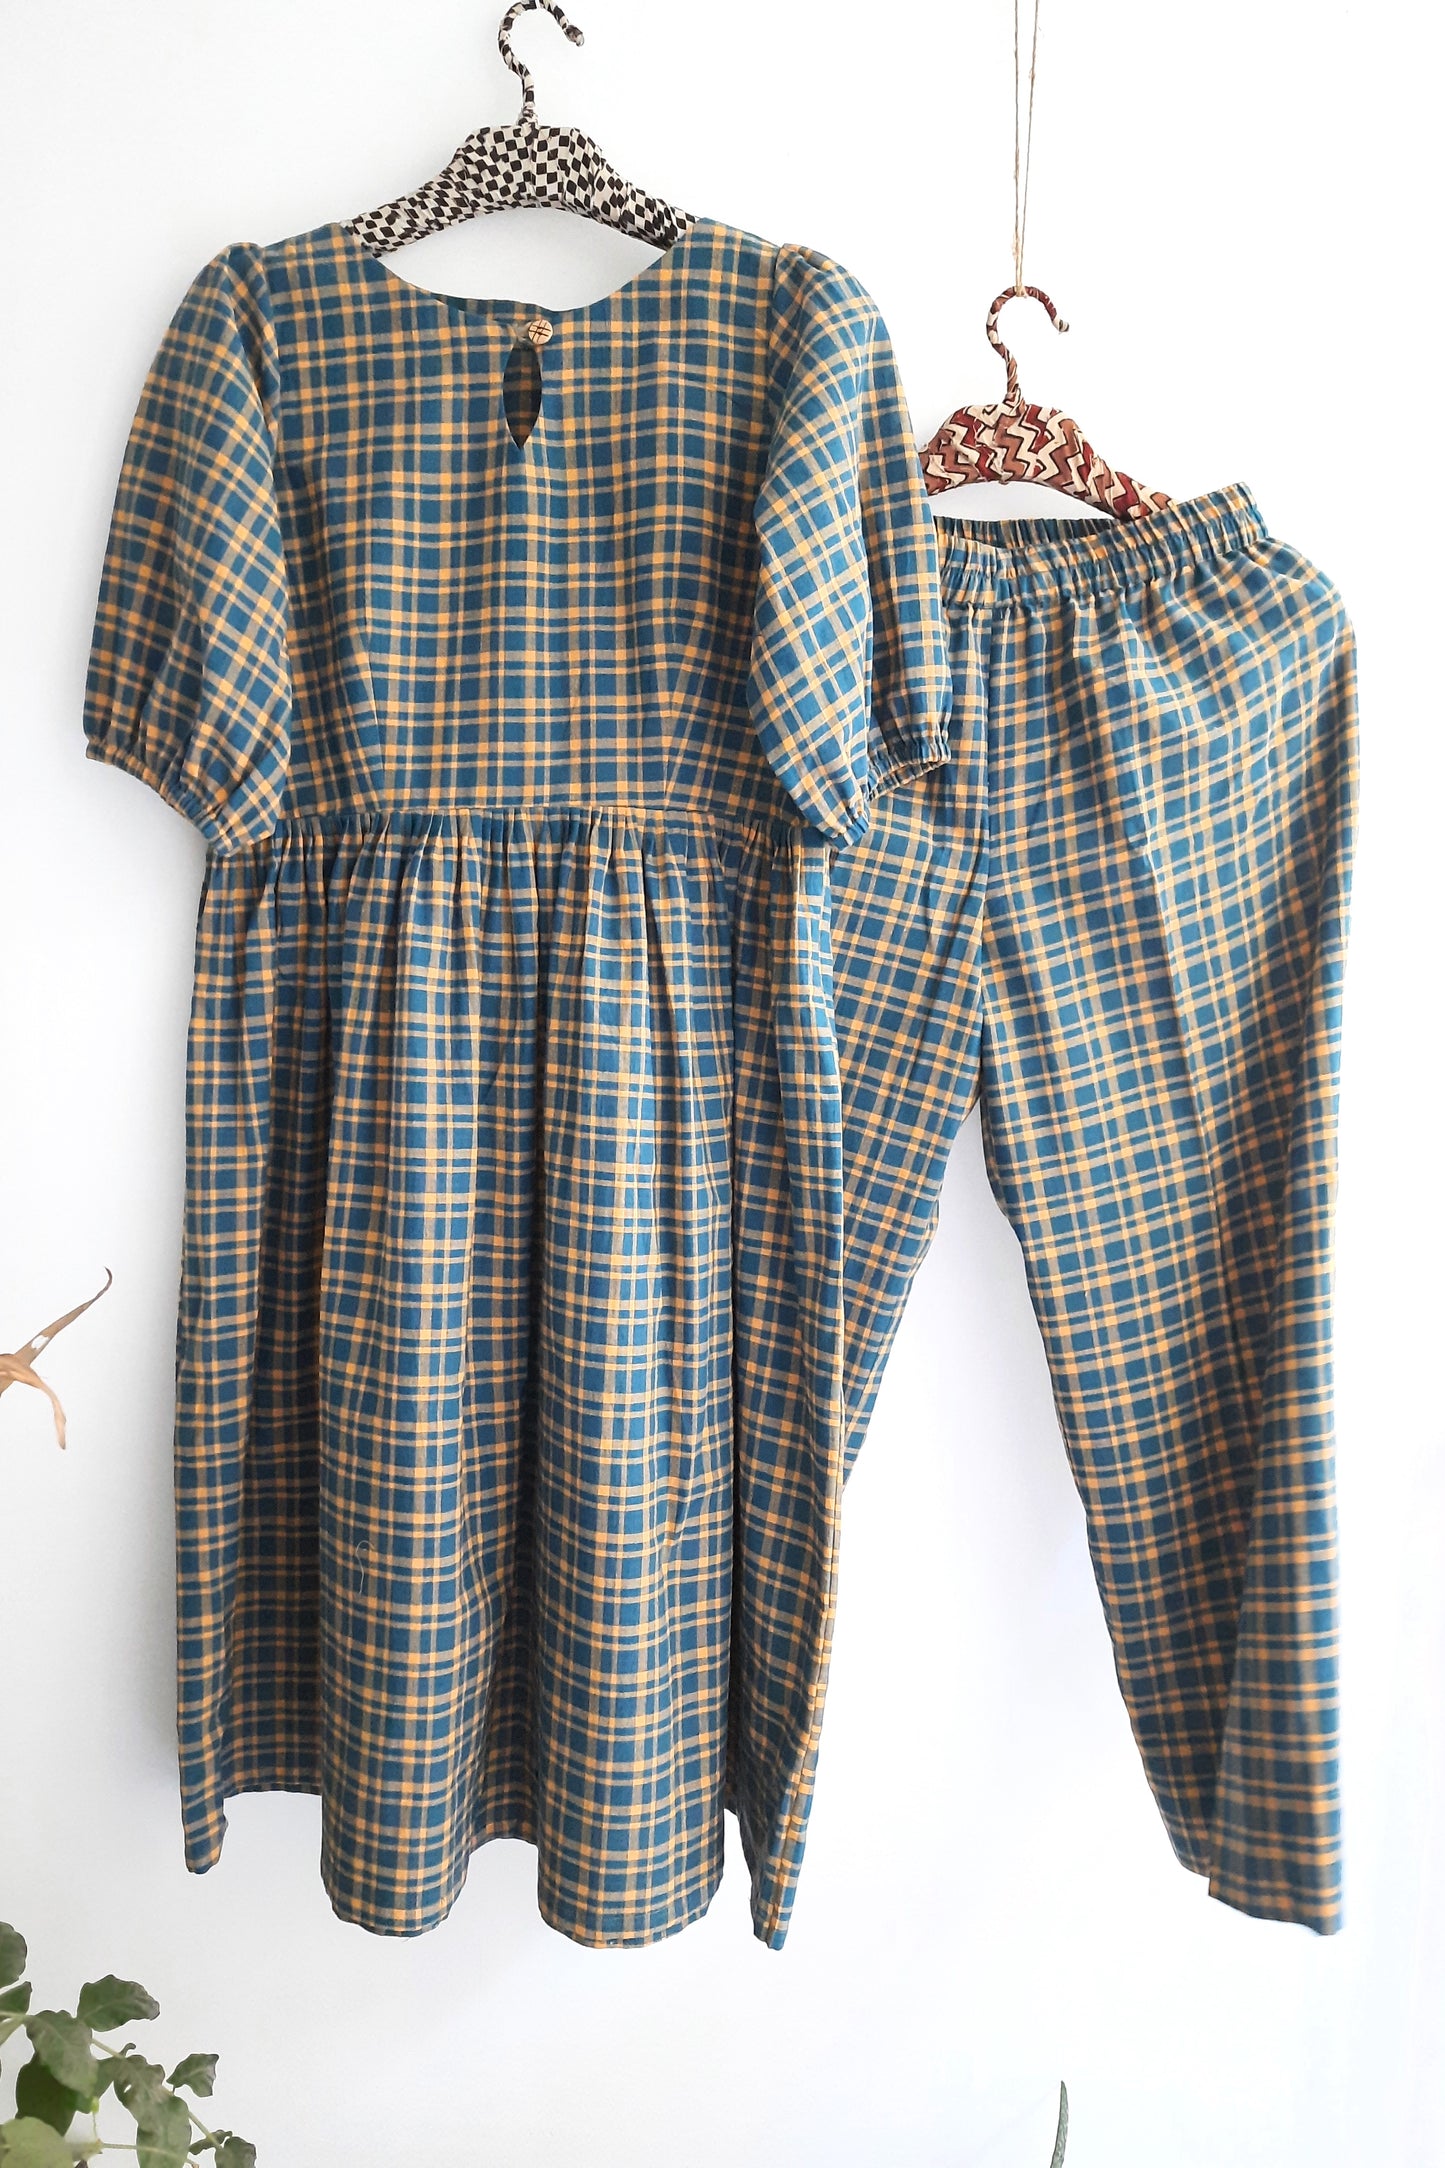 Coord set - Hand-spun cotton checkered coord set for women crafted in India